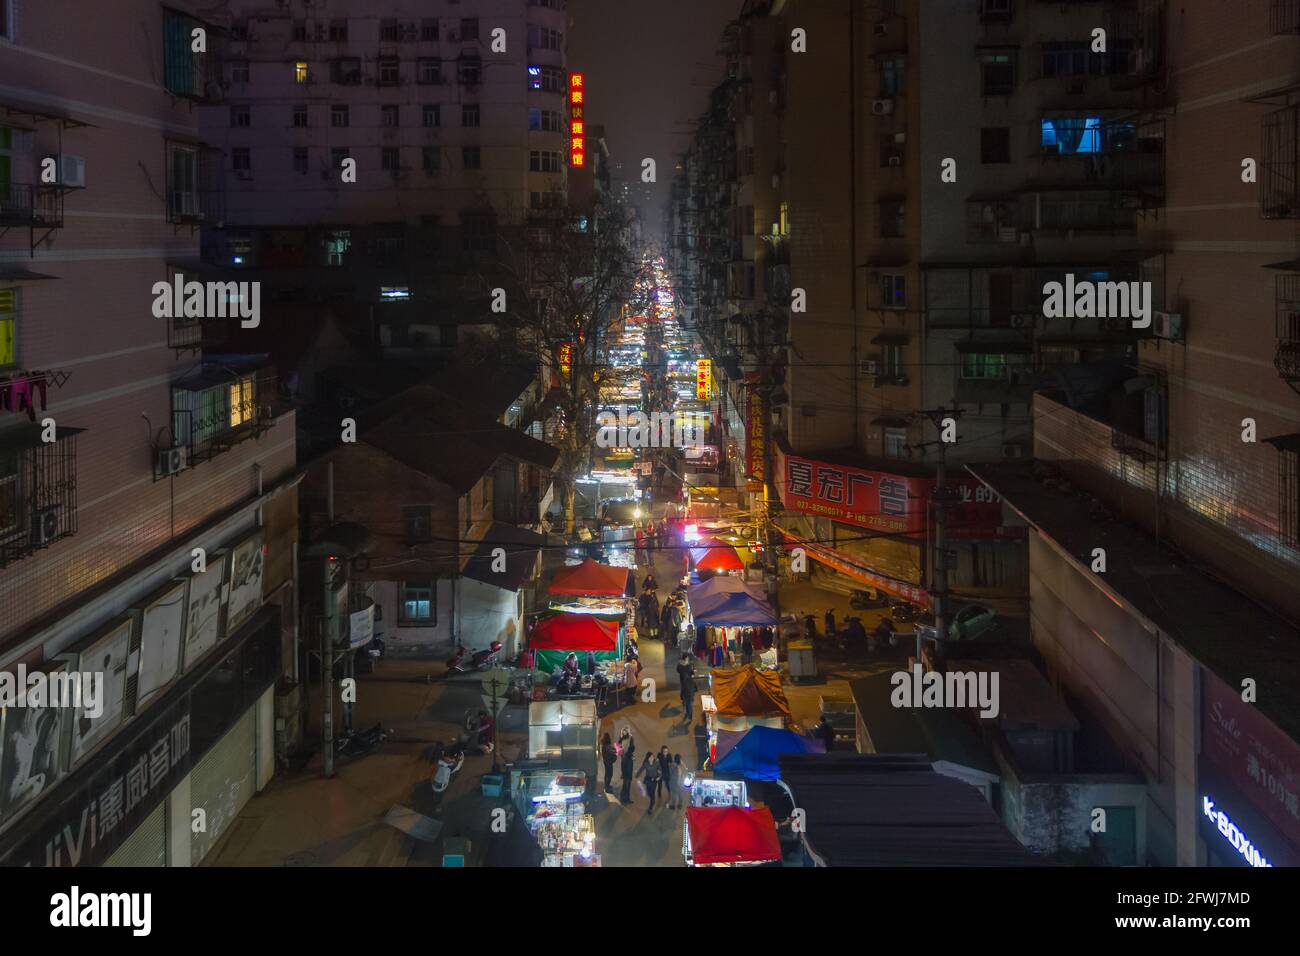 Wuhan, Hubei Province, China - February 21, 2013: A night market in downtown Wuhan Stock Photo